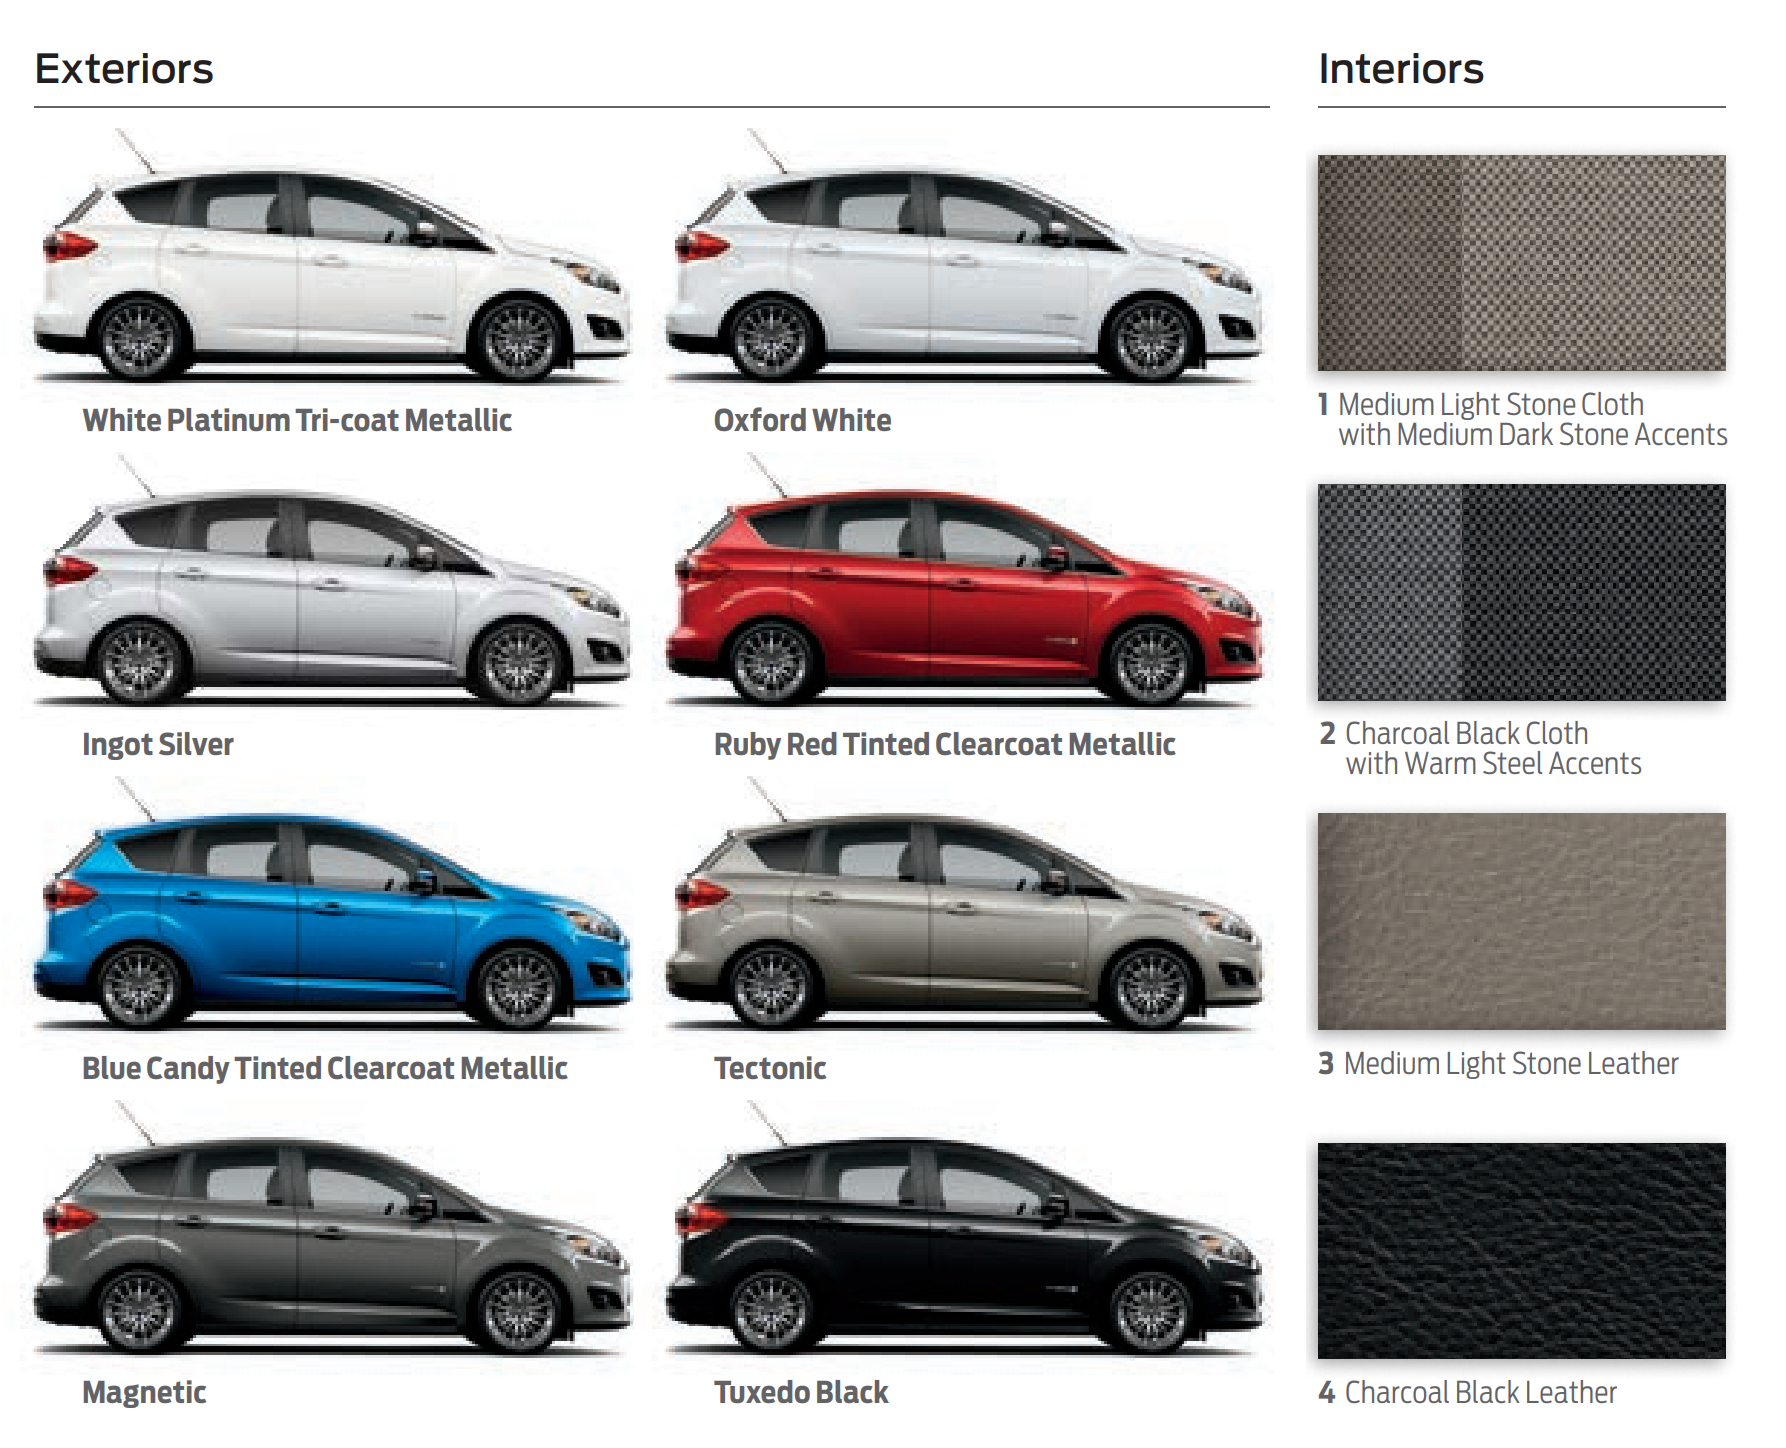 A picture showing exterior and interior paint samples for the 2015 Ford C-max vehicles